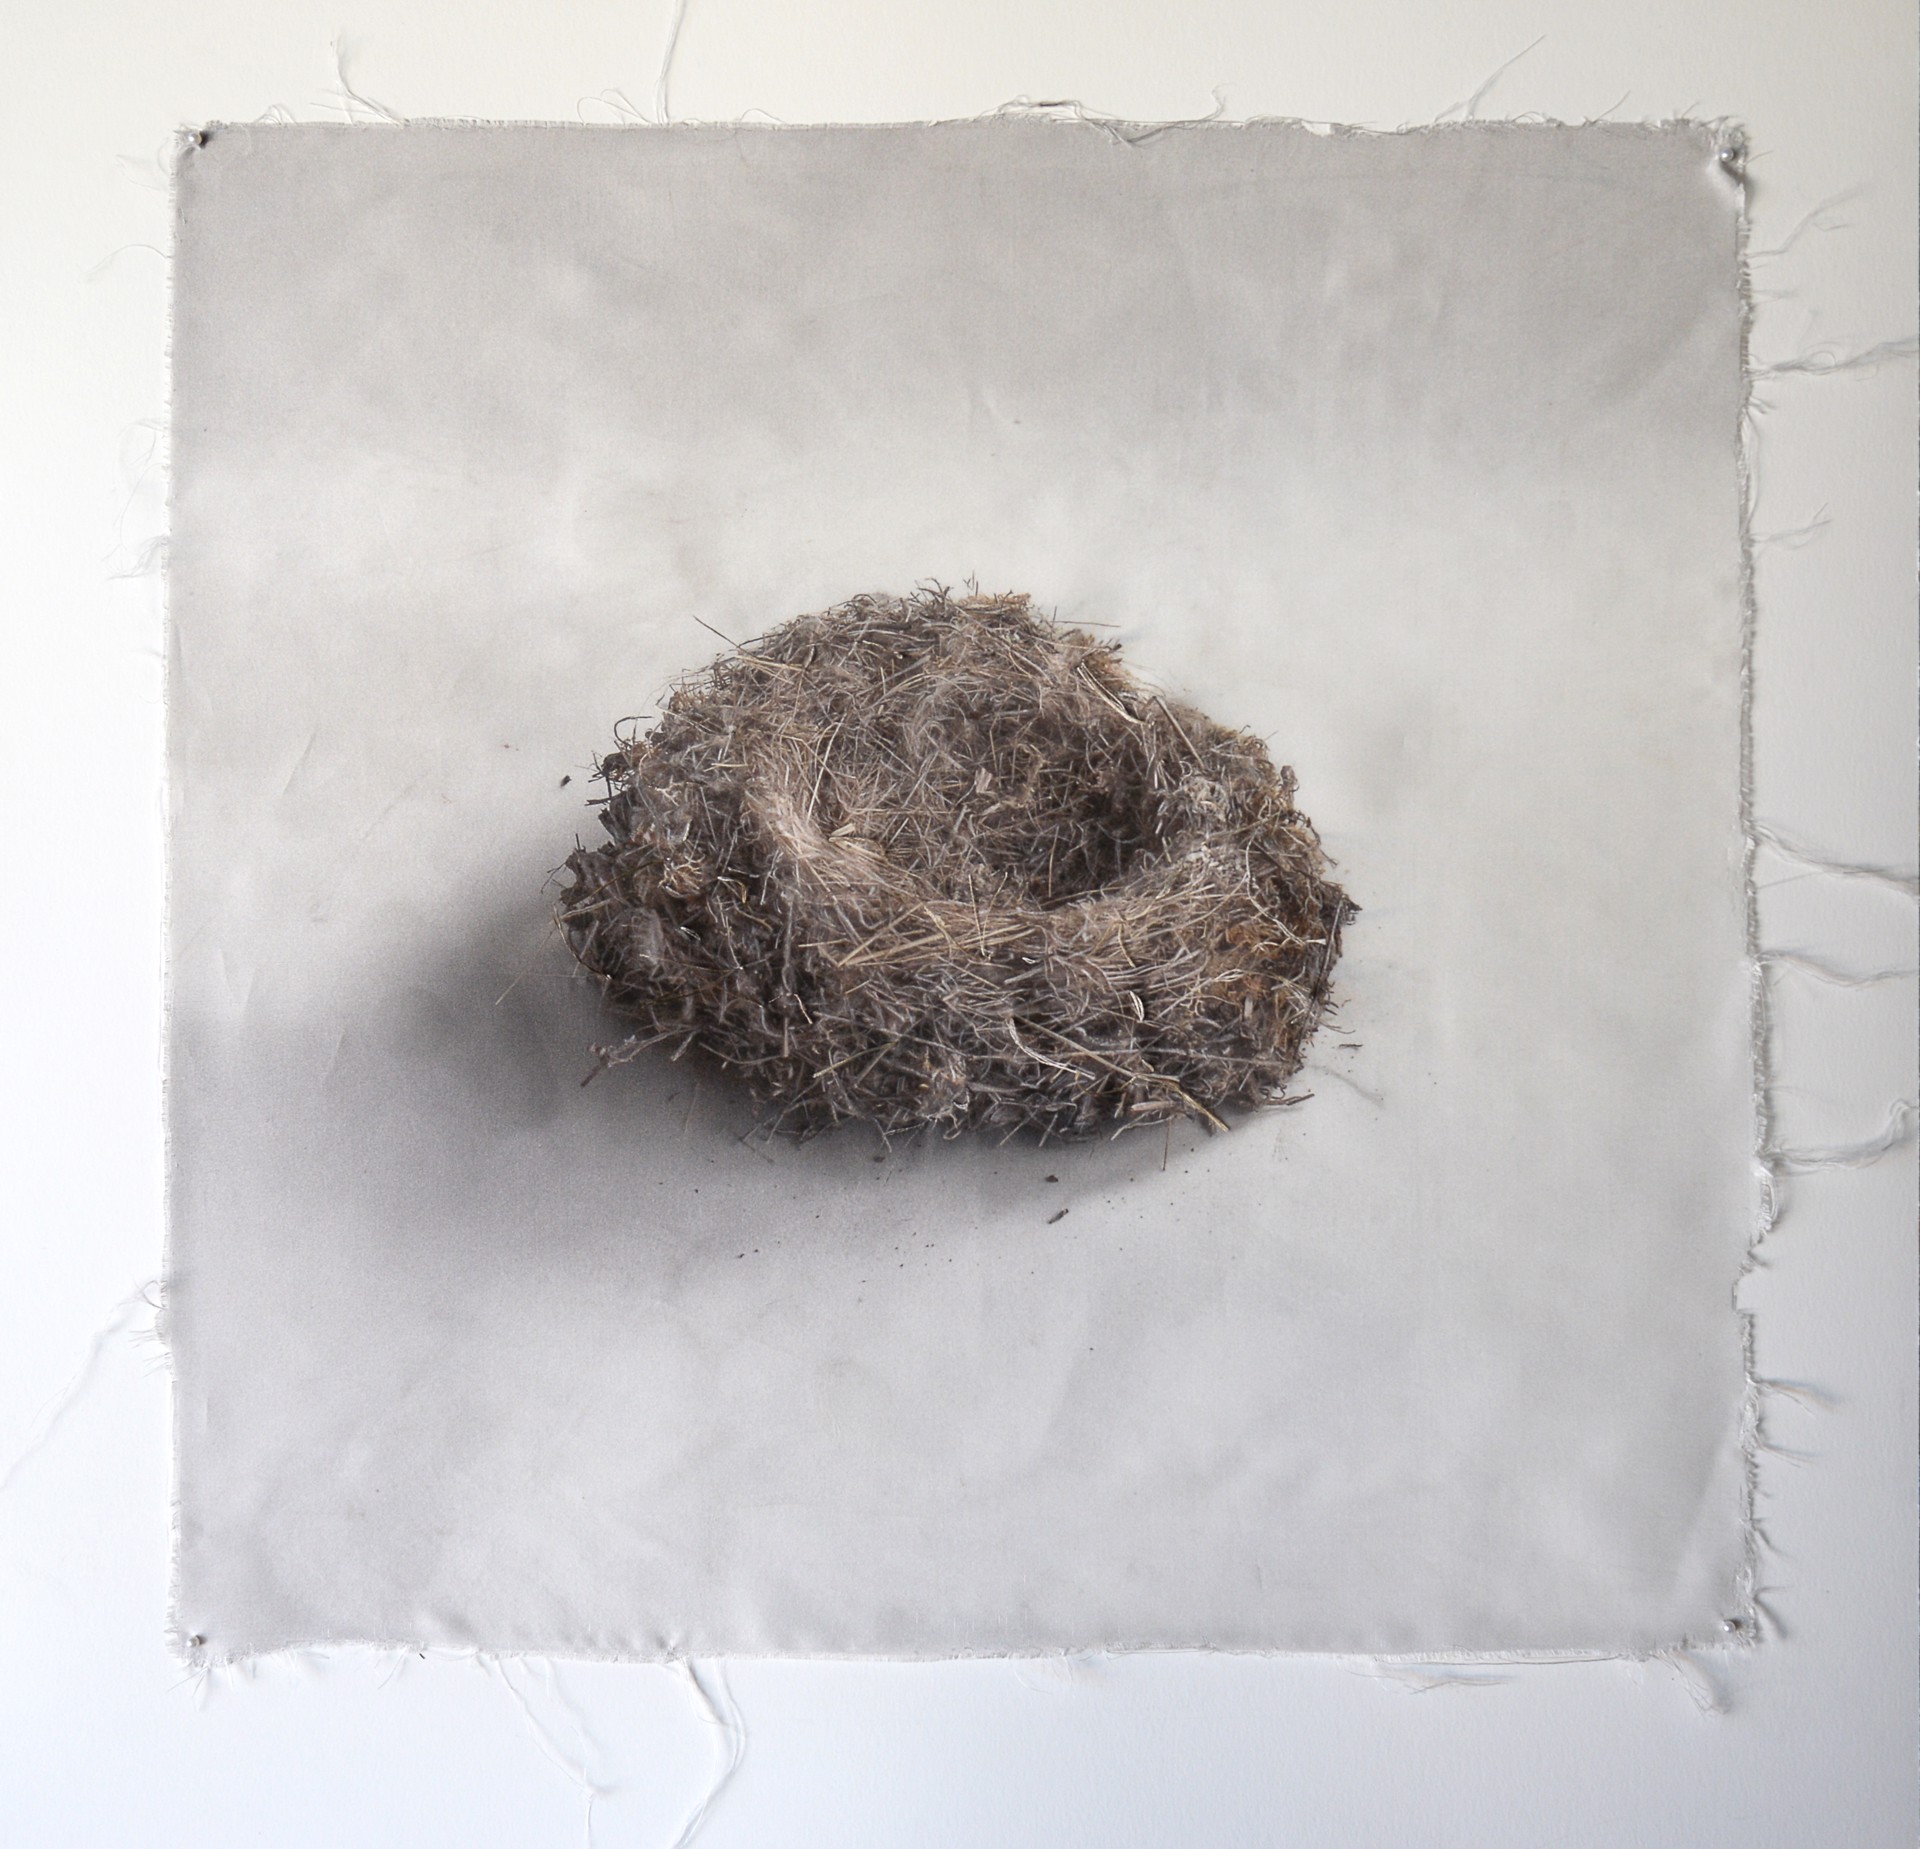 Untitled Nests #6 by Kate Breakey